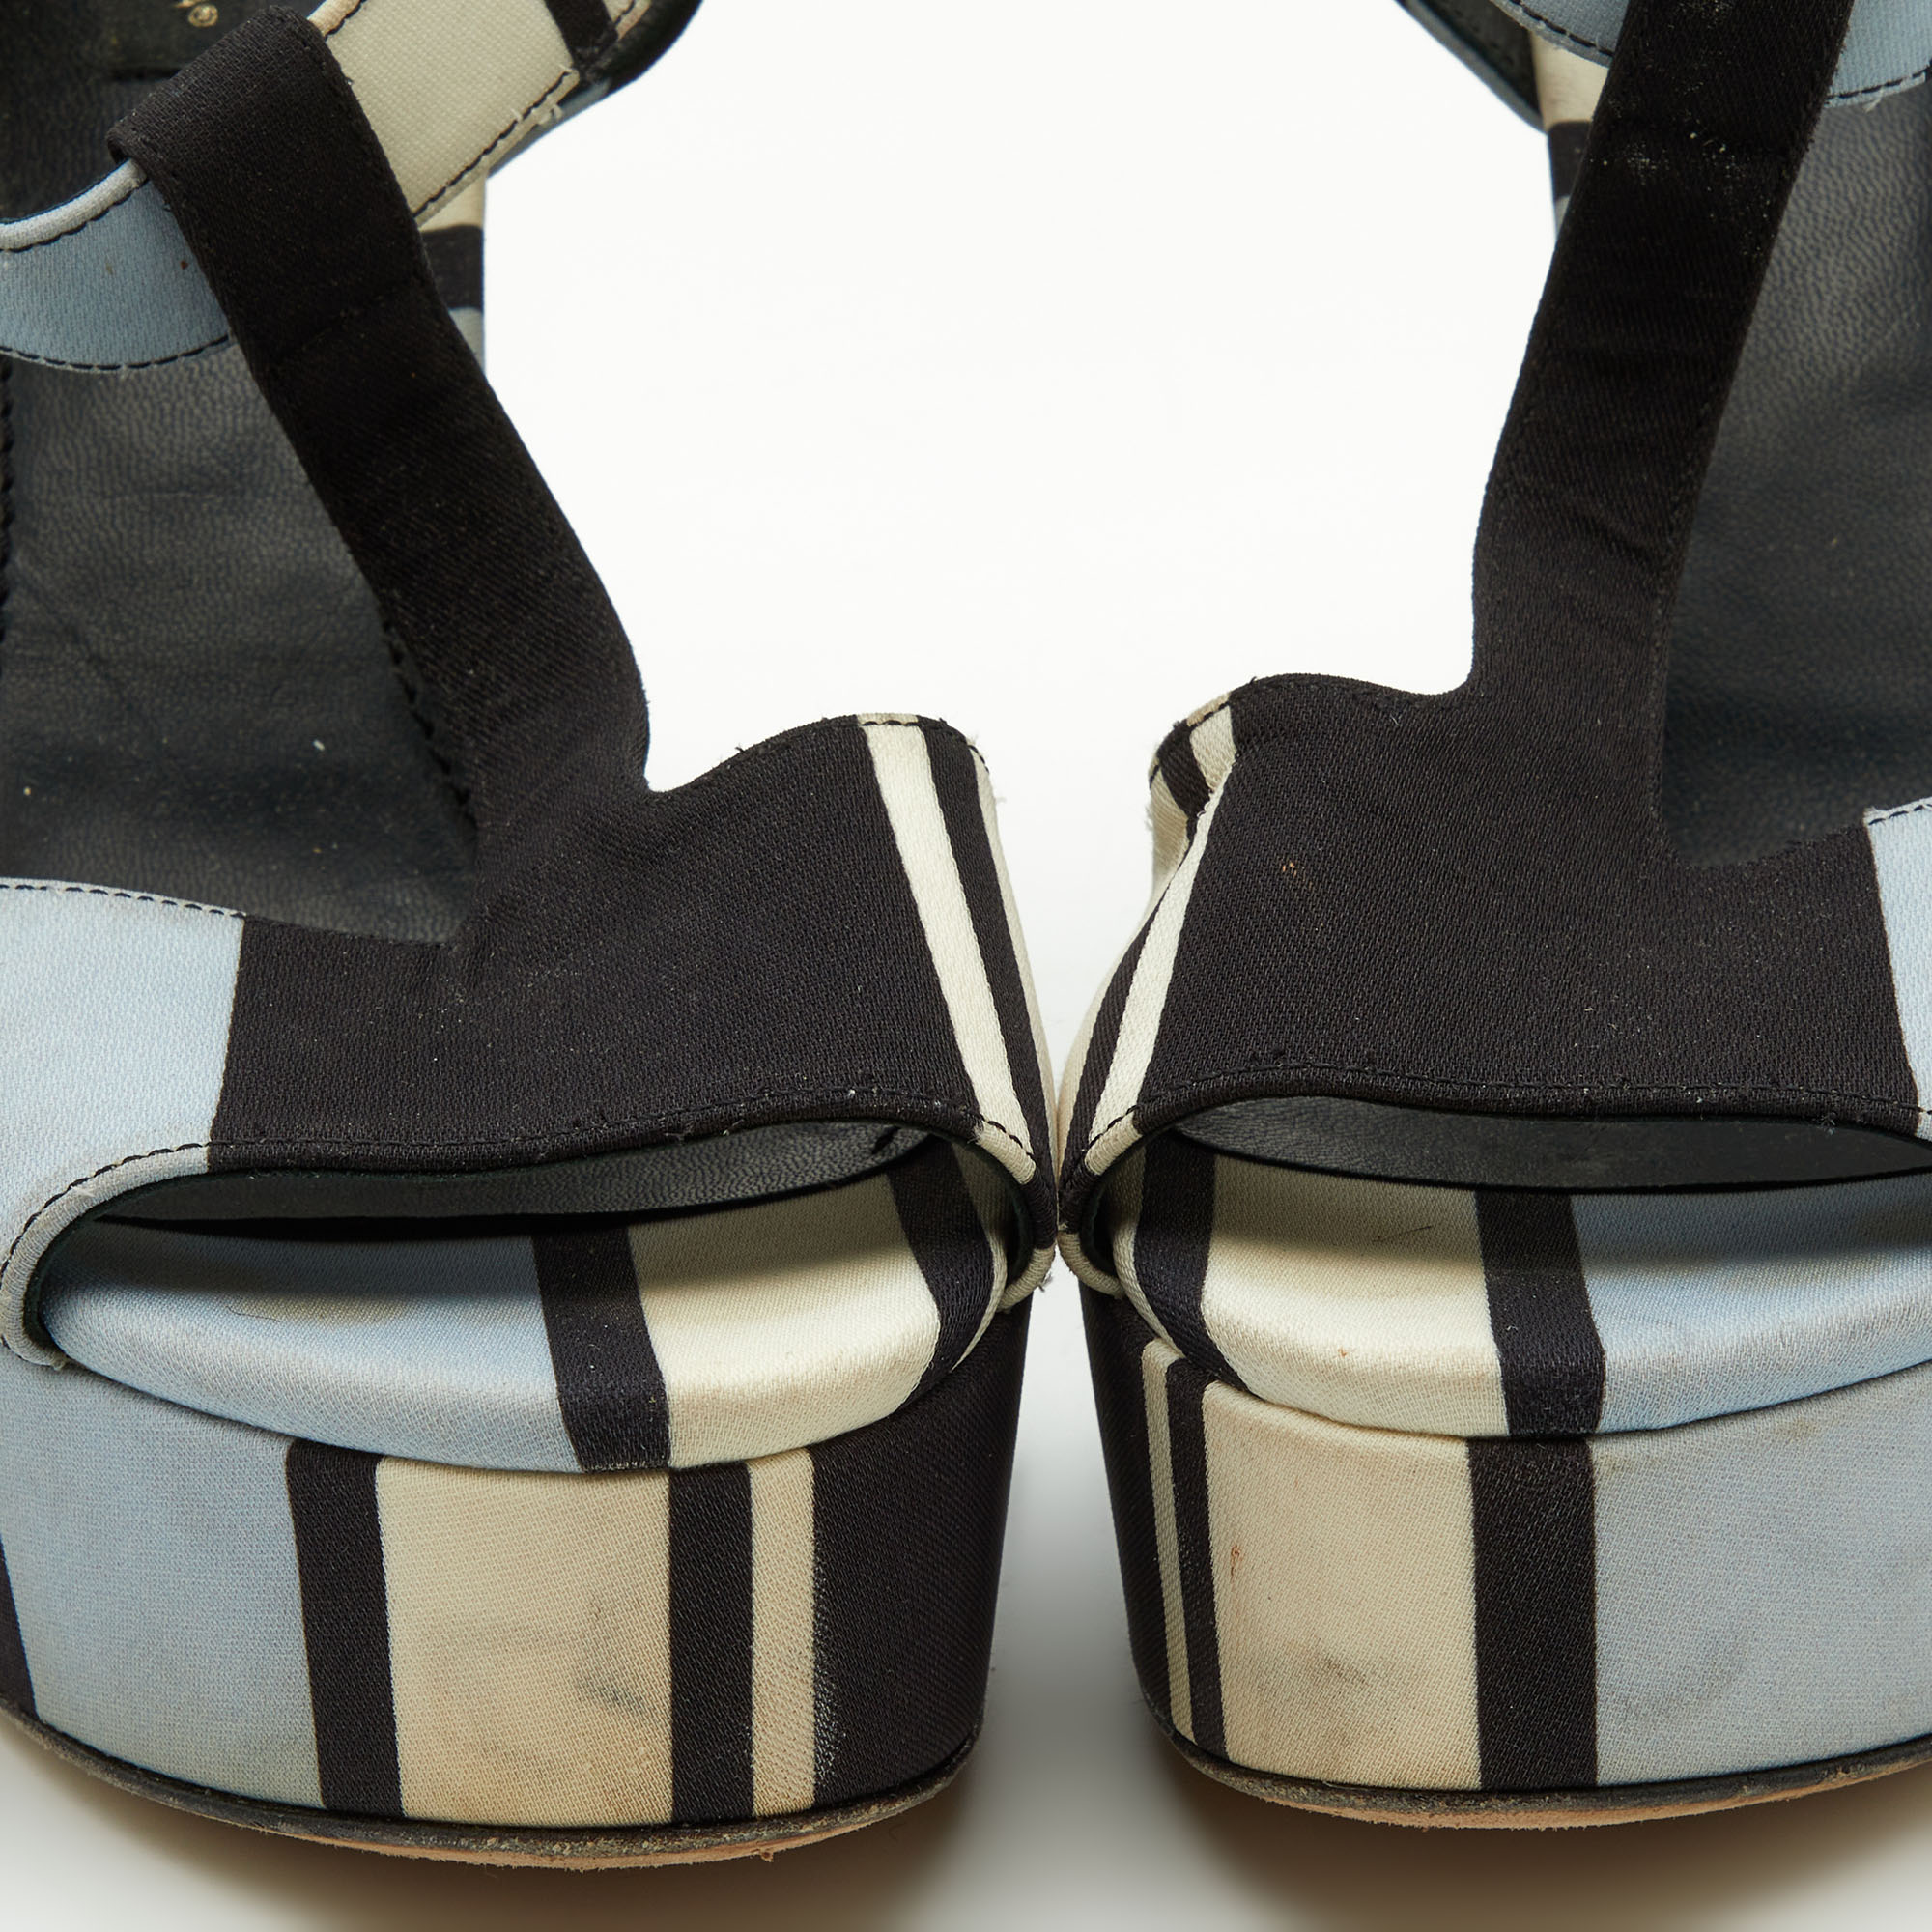 Dolce & Gabbana Tri Color Printed Fabric T-Strap Wedge Sandals Size 39.5